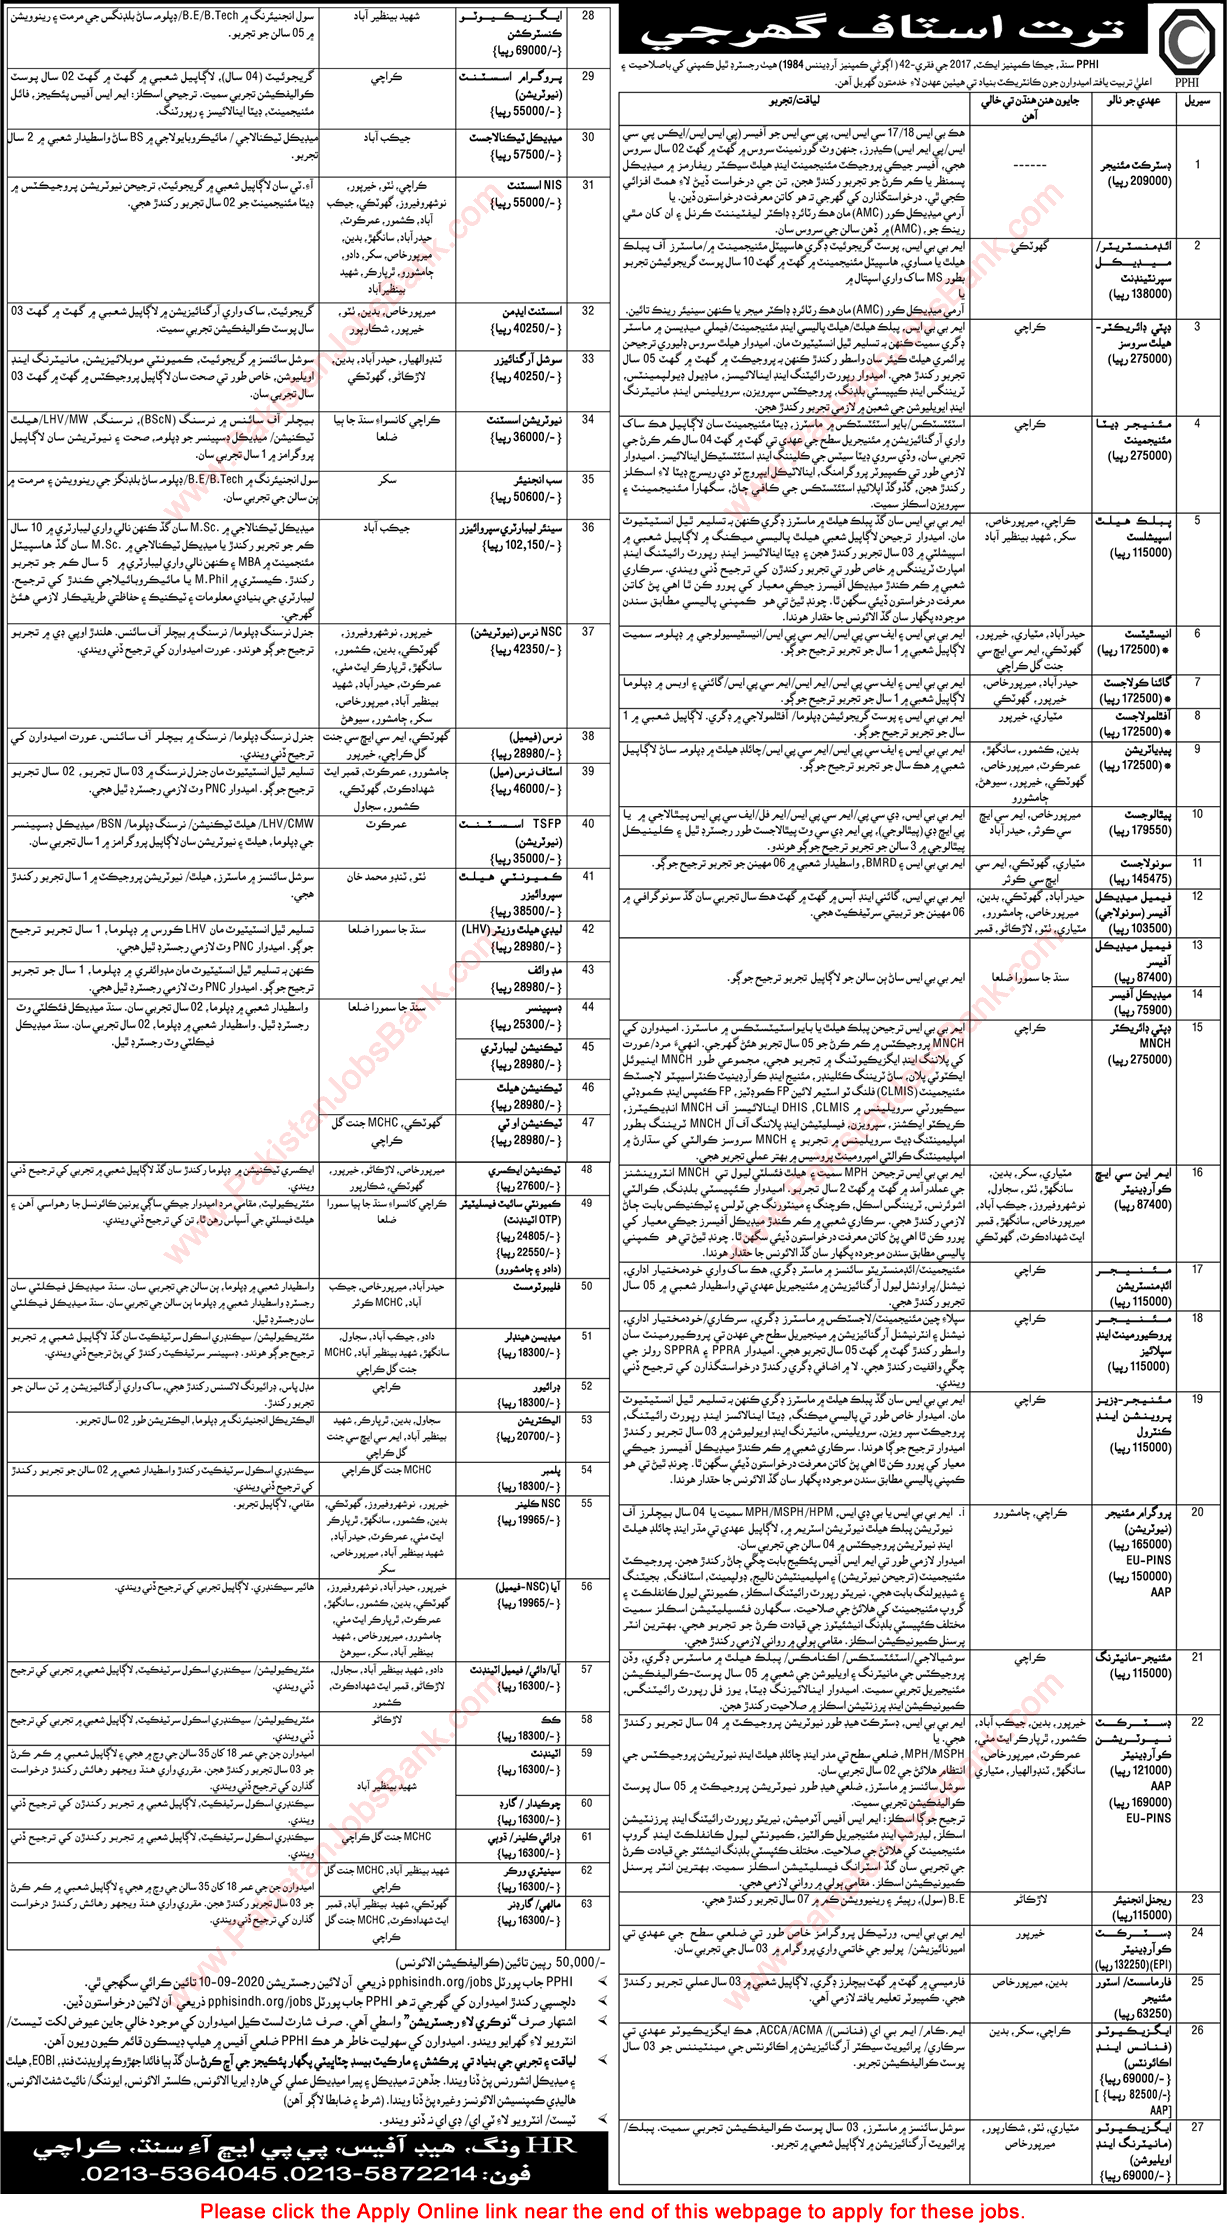 PPHI Sindh Jobs August 2020 Apply Online Registration People's Primary Healthcare Initiative Latest